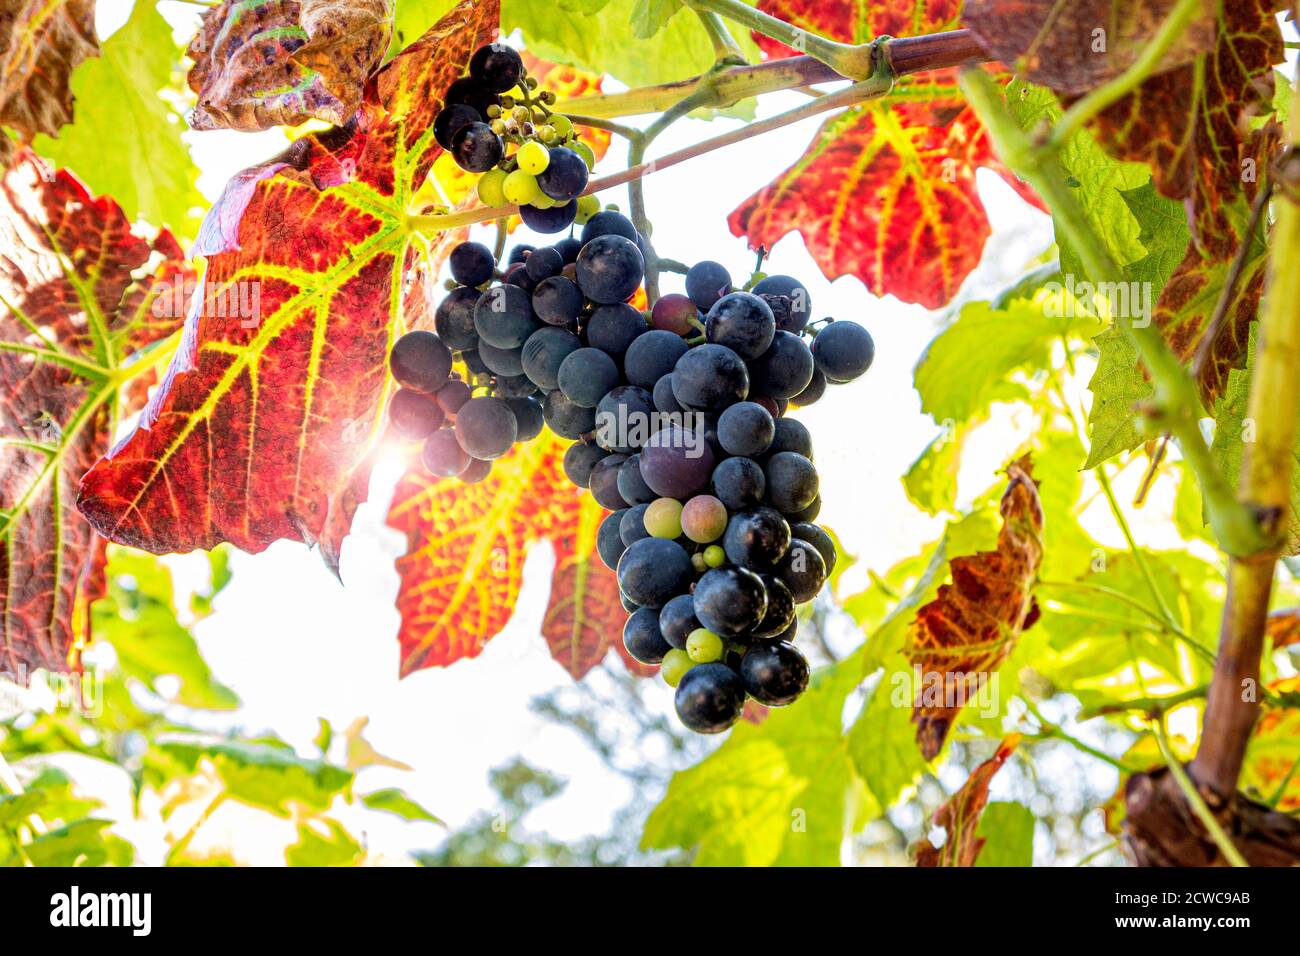 Schuyler ripe grapes UK, a blue-skinned hybrid wine & table grape created by crossing red Vitis vinifera Zinfandel with Vitis labrusca hybrid Ontario. Stock Photo